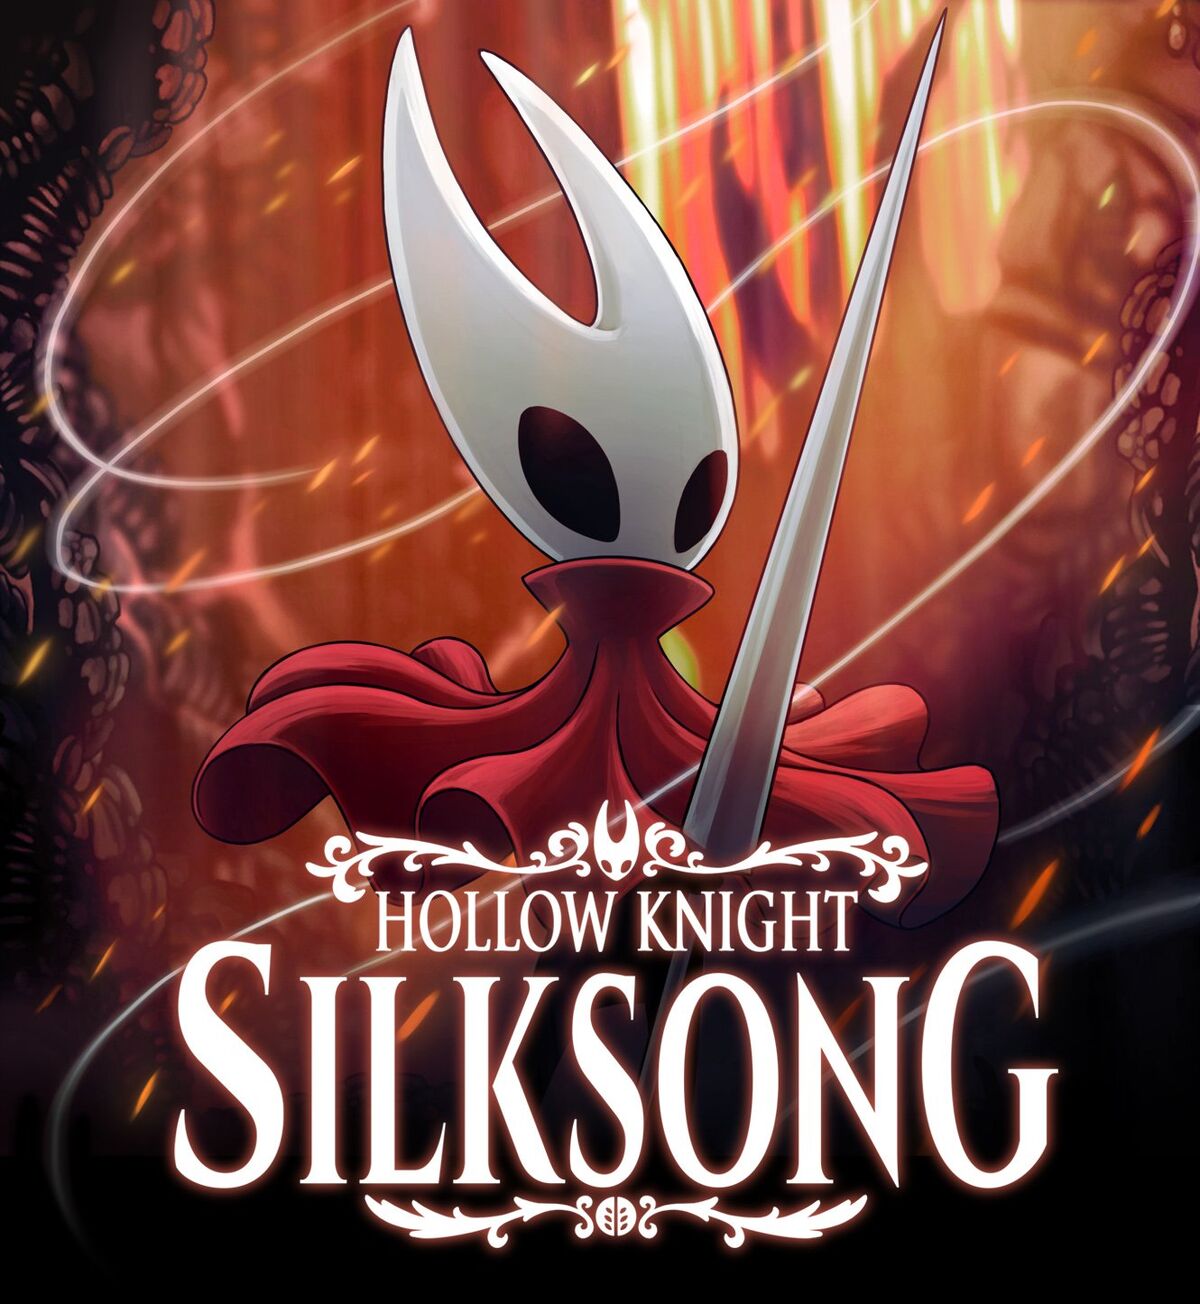 https://static.wikia.nocookie.net/hollowknight/images/1/13/Silksong_cover.jpg/revision/latest/scale-to-width-down/1200?cb=20190214093718